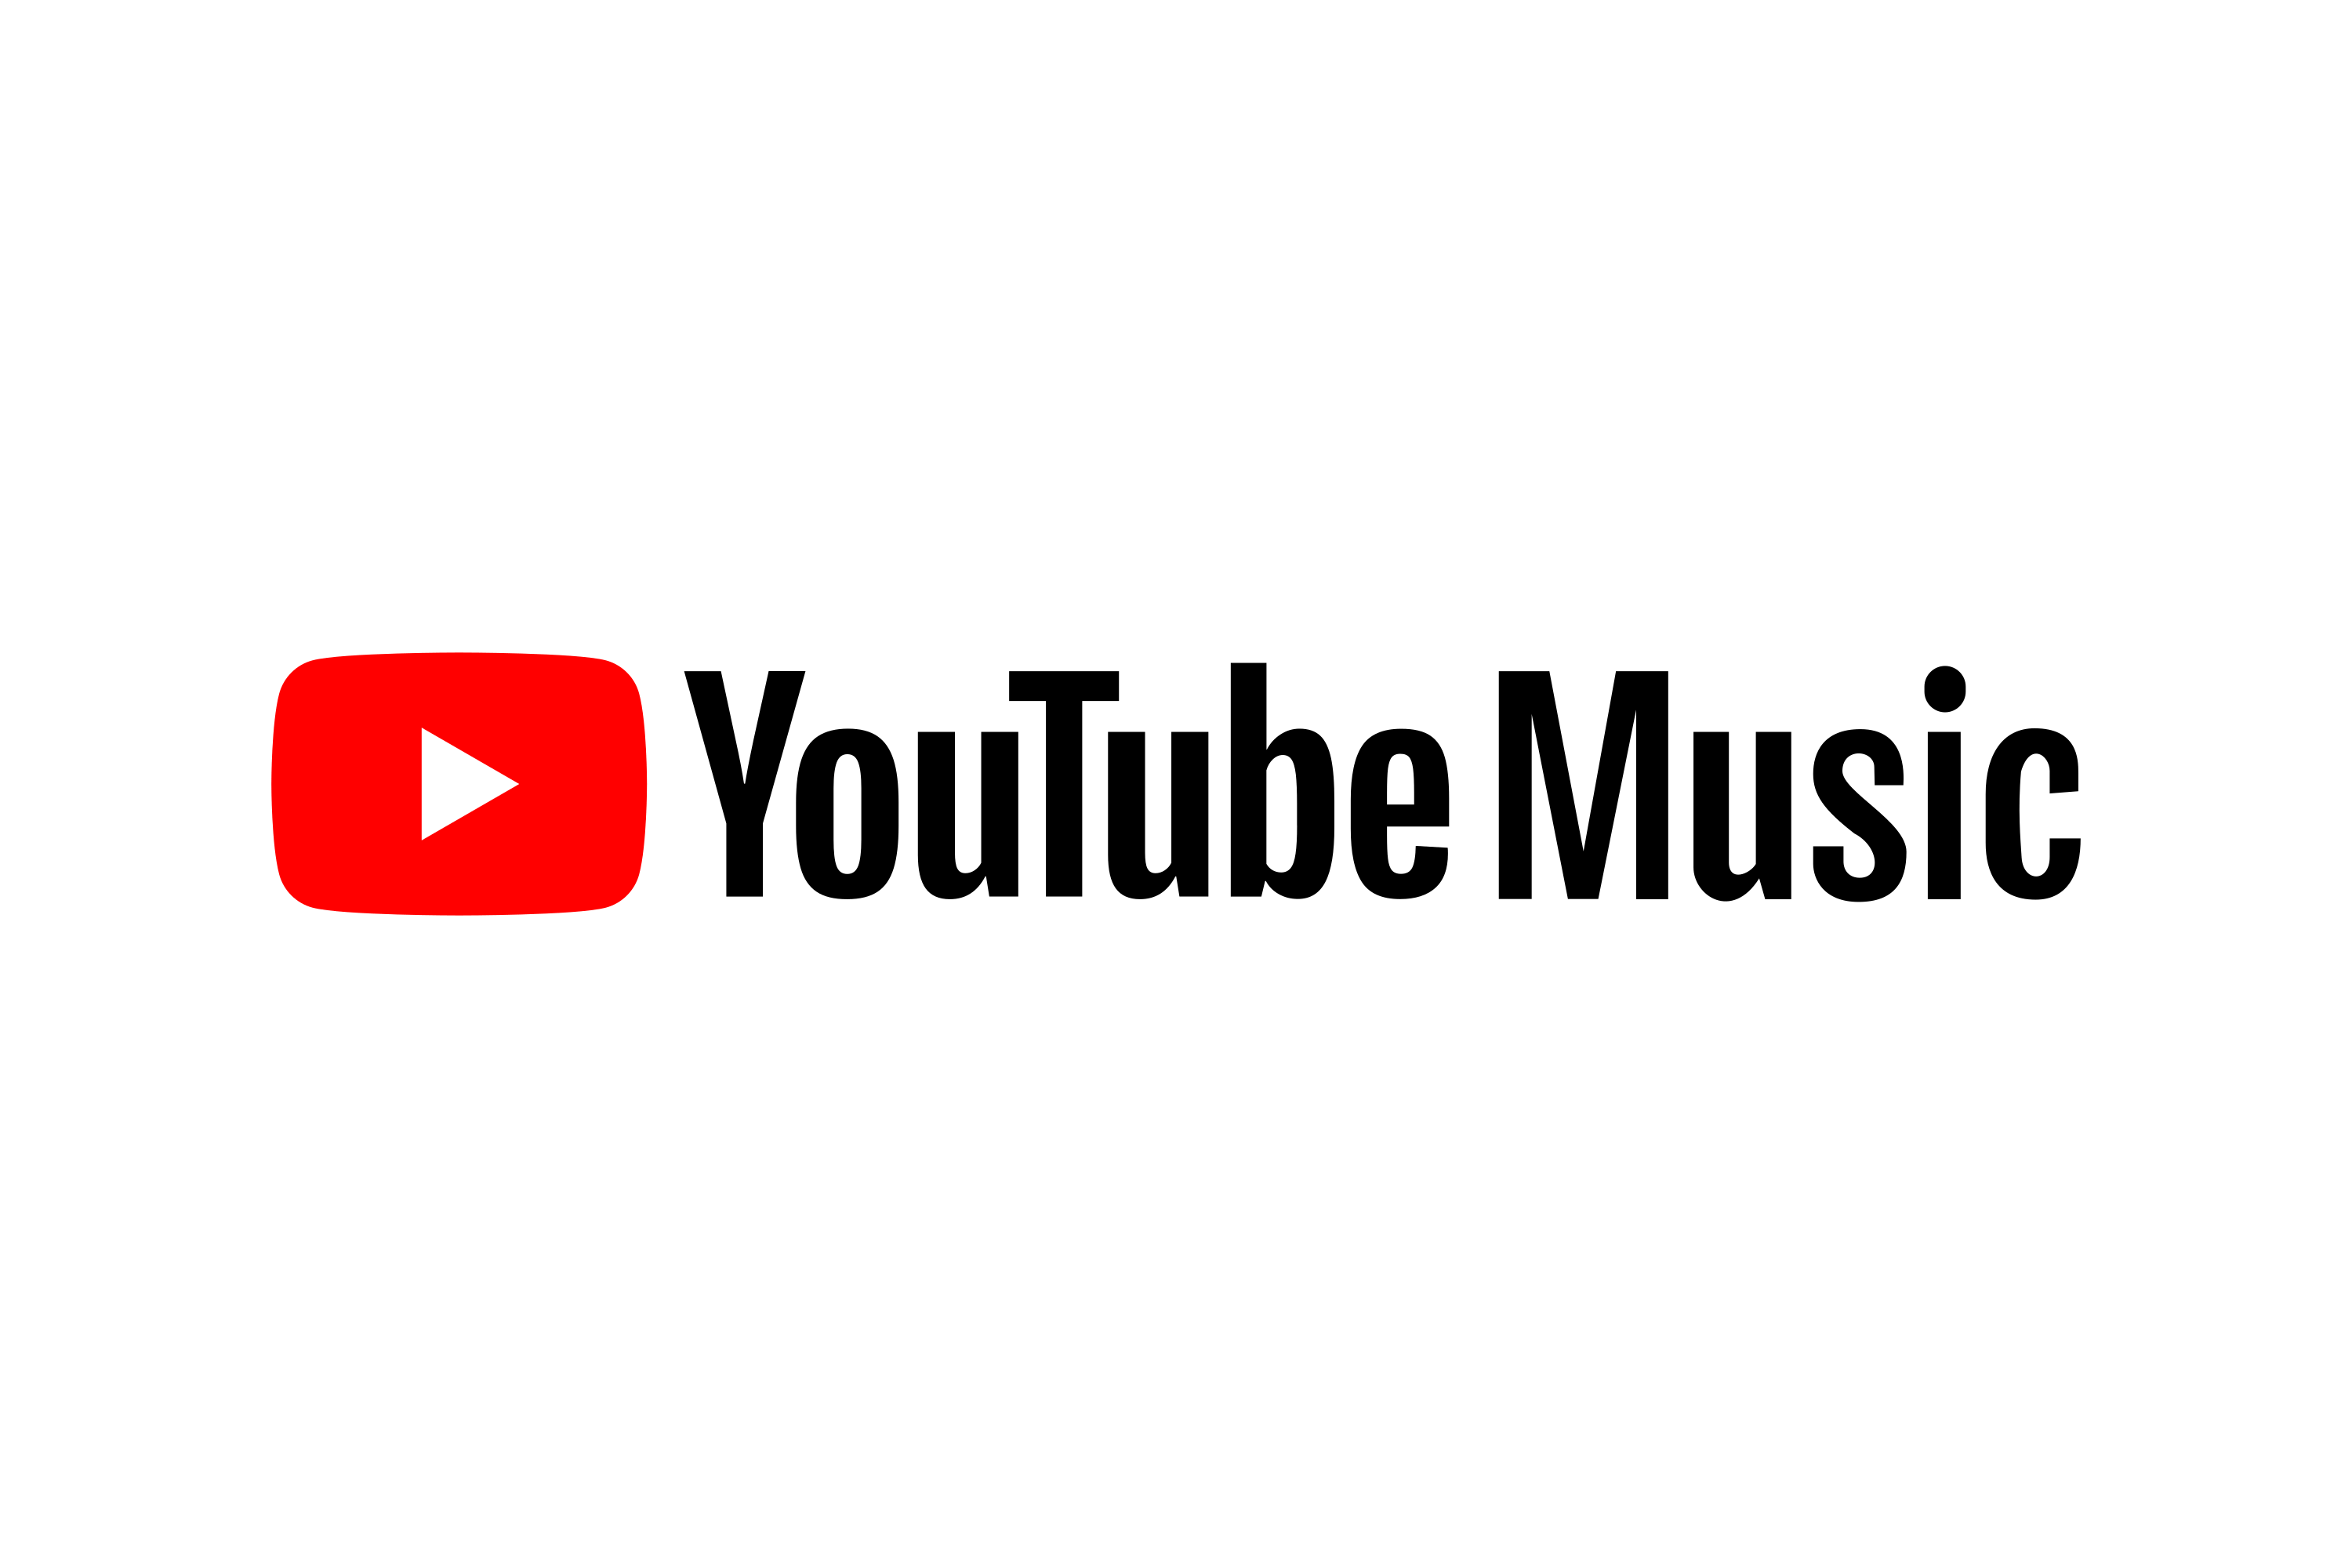 YouTube Music Logo Free download logo in SVG or PNG format